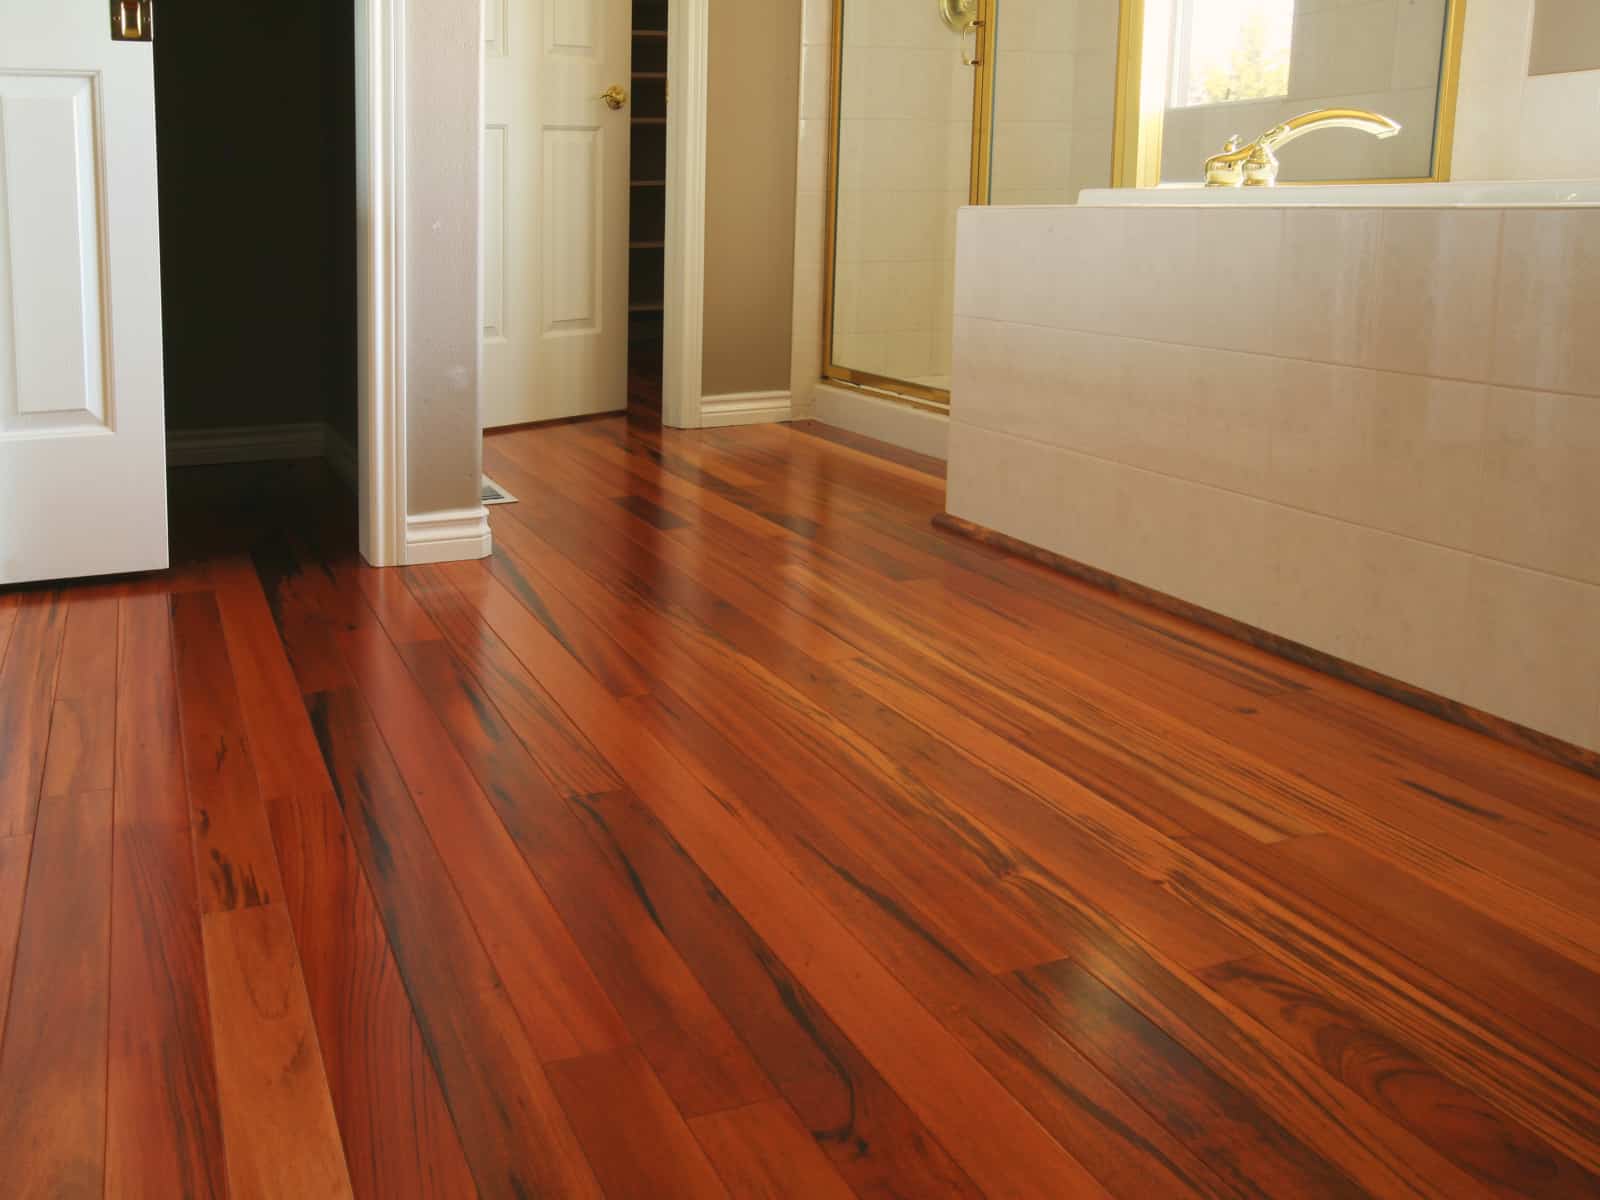 What Is The Of Hardwood Flooring, How Much To Install Oak Hardwood Floors